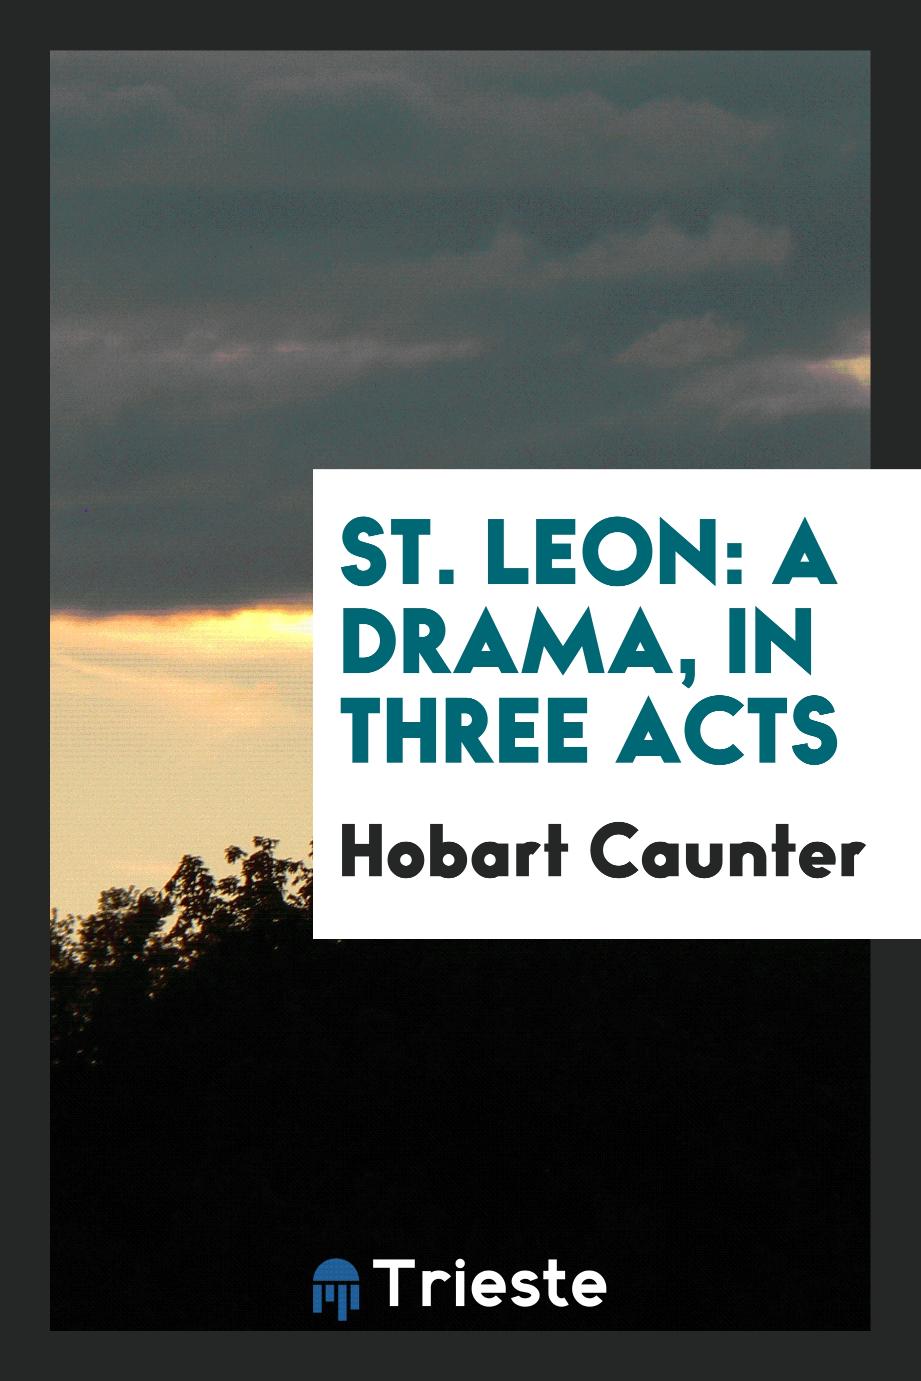 St. Leon: A Drama, in Three Acts